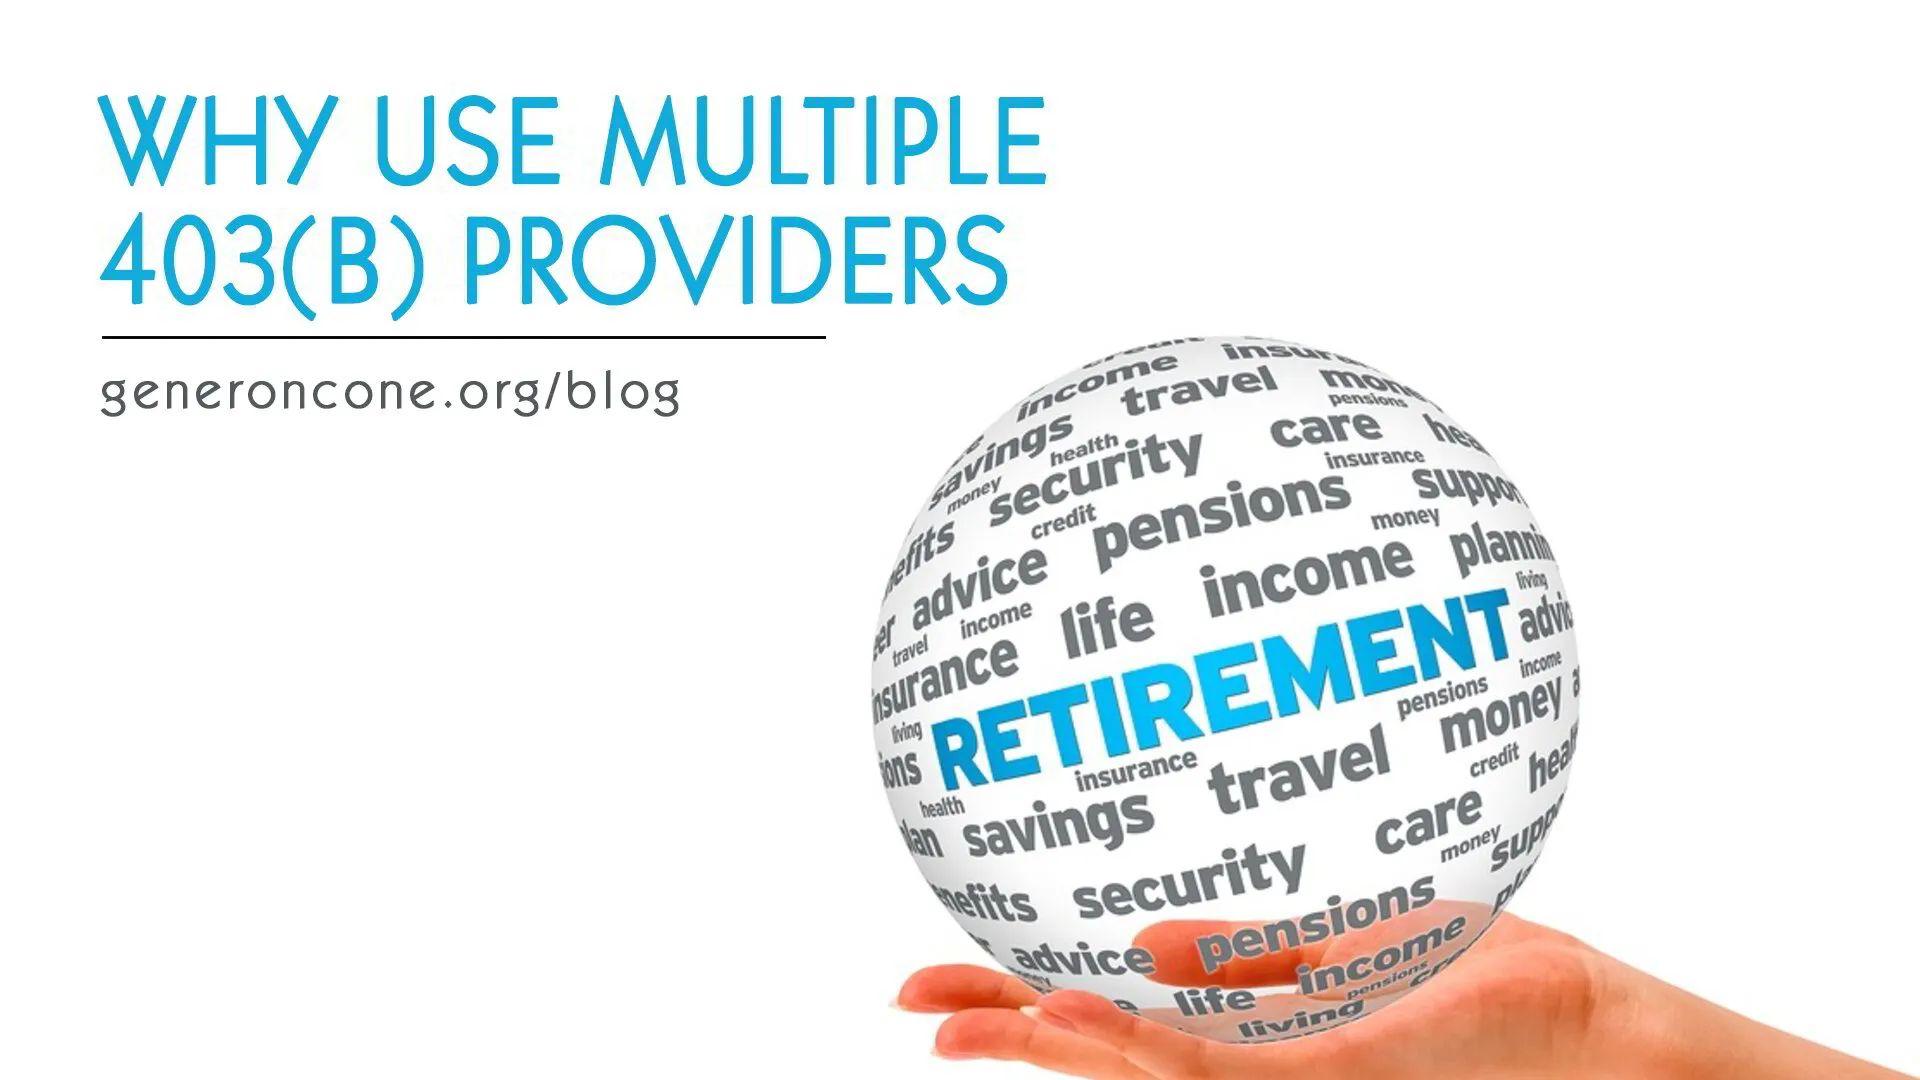 Why Use Multiple 403(b) Providers